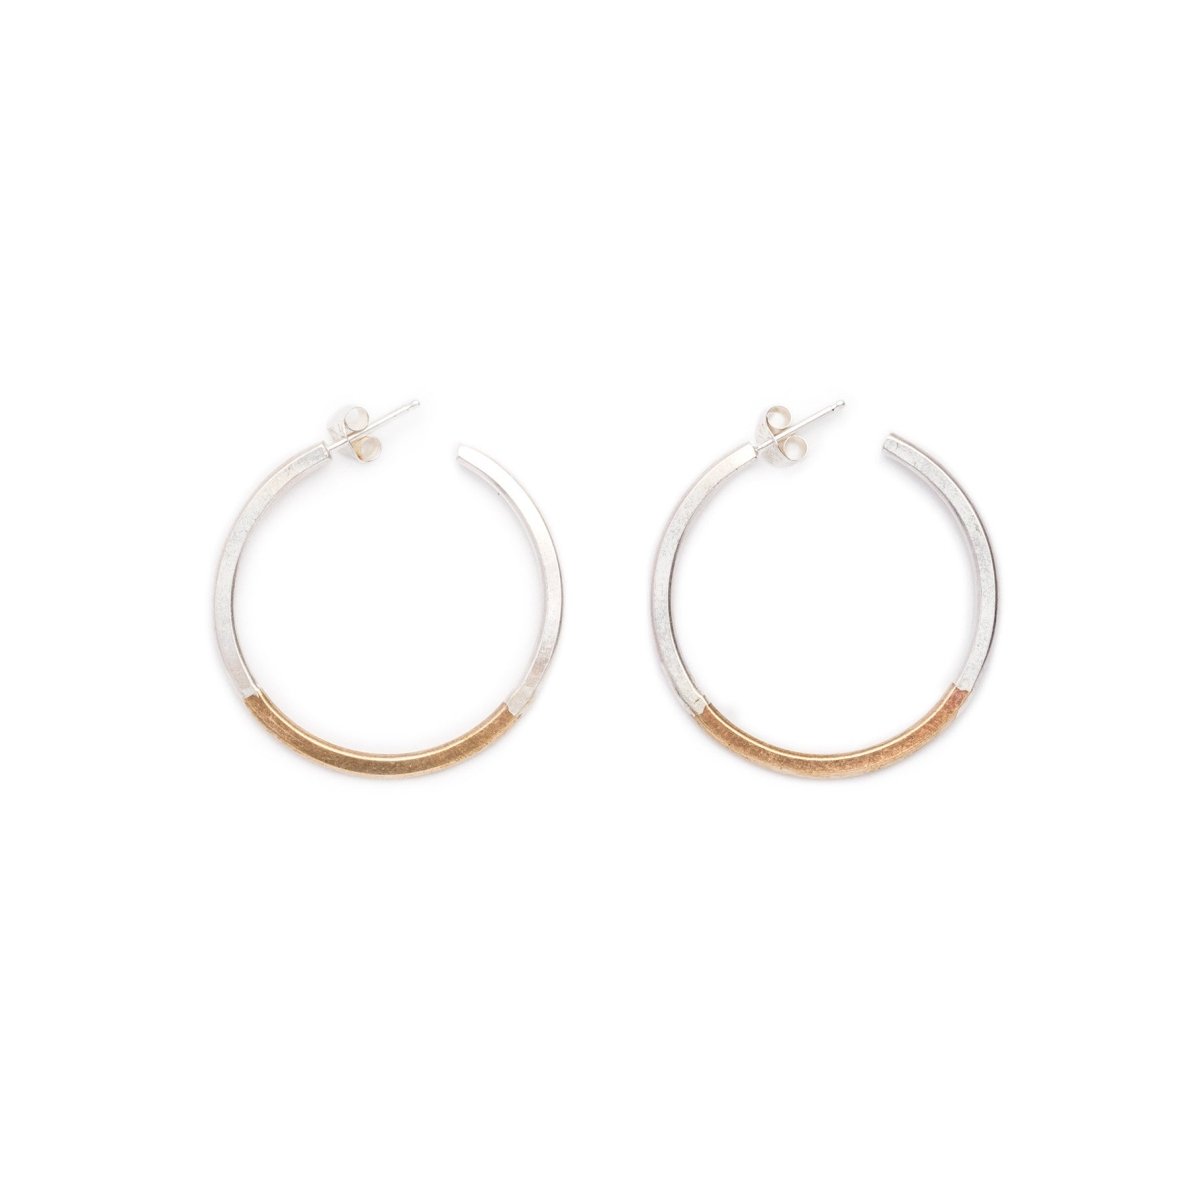 Small, minimalist, and lightweight hoop earrings of mixed brass and sterling silver hand-forged wire, with soldered sterling silver earring posts and sterling silver butterfly backings. Hand-crafted in Portland, Oregon.